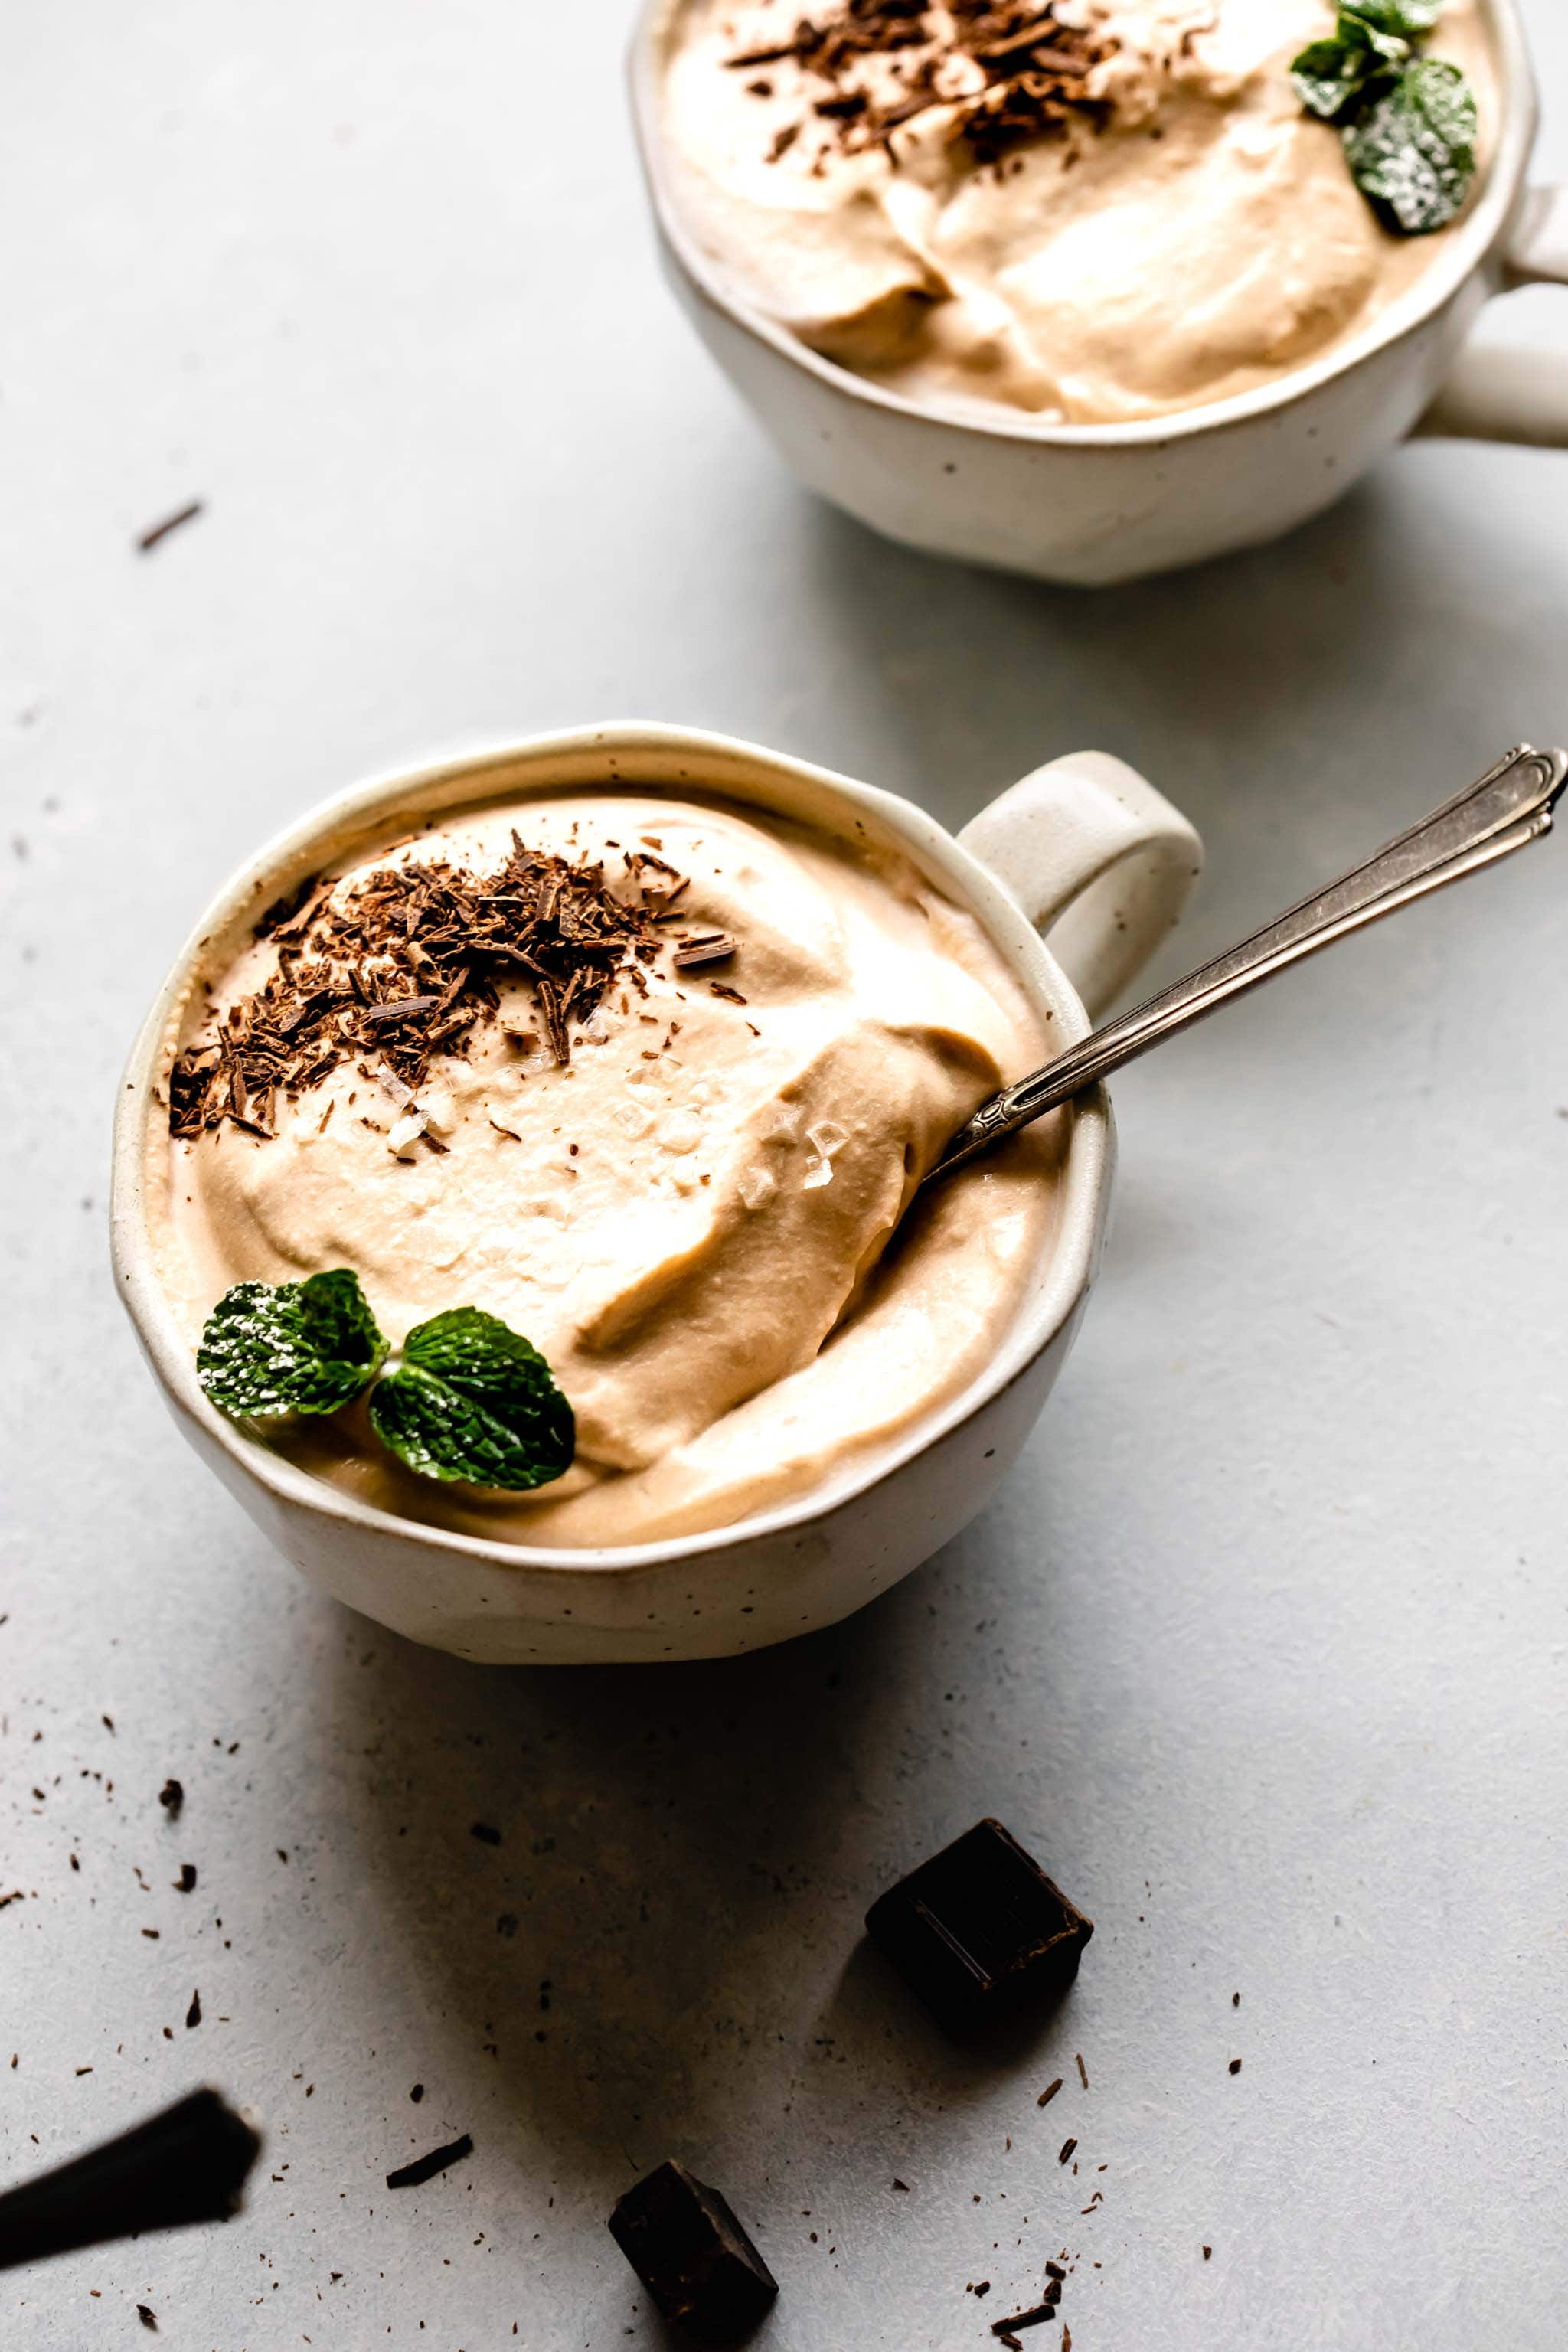 Side view of two mugs of coffee mousse topped with chocolate shavings and mint sprigs.